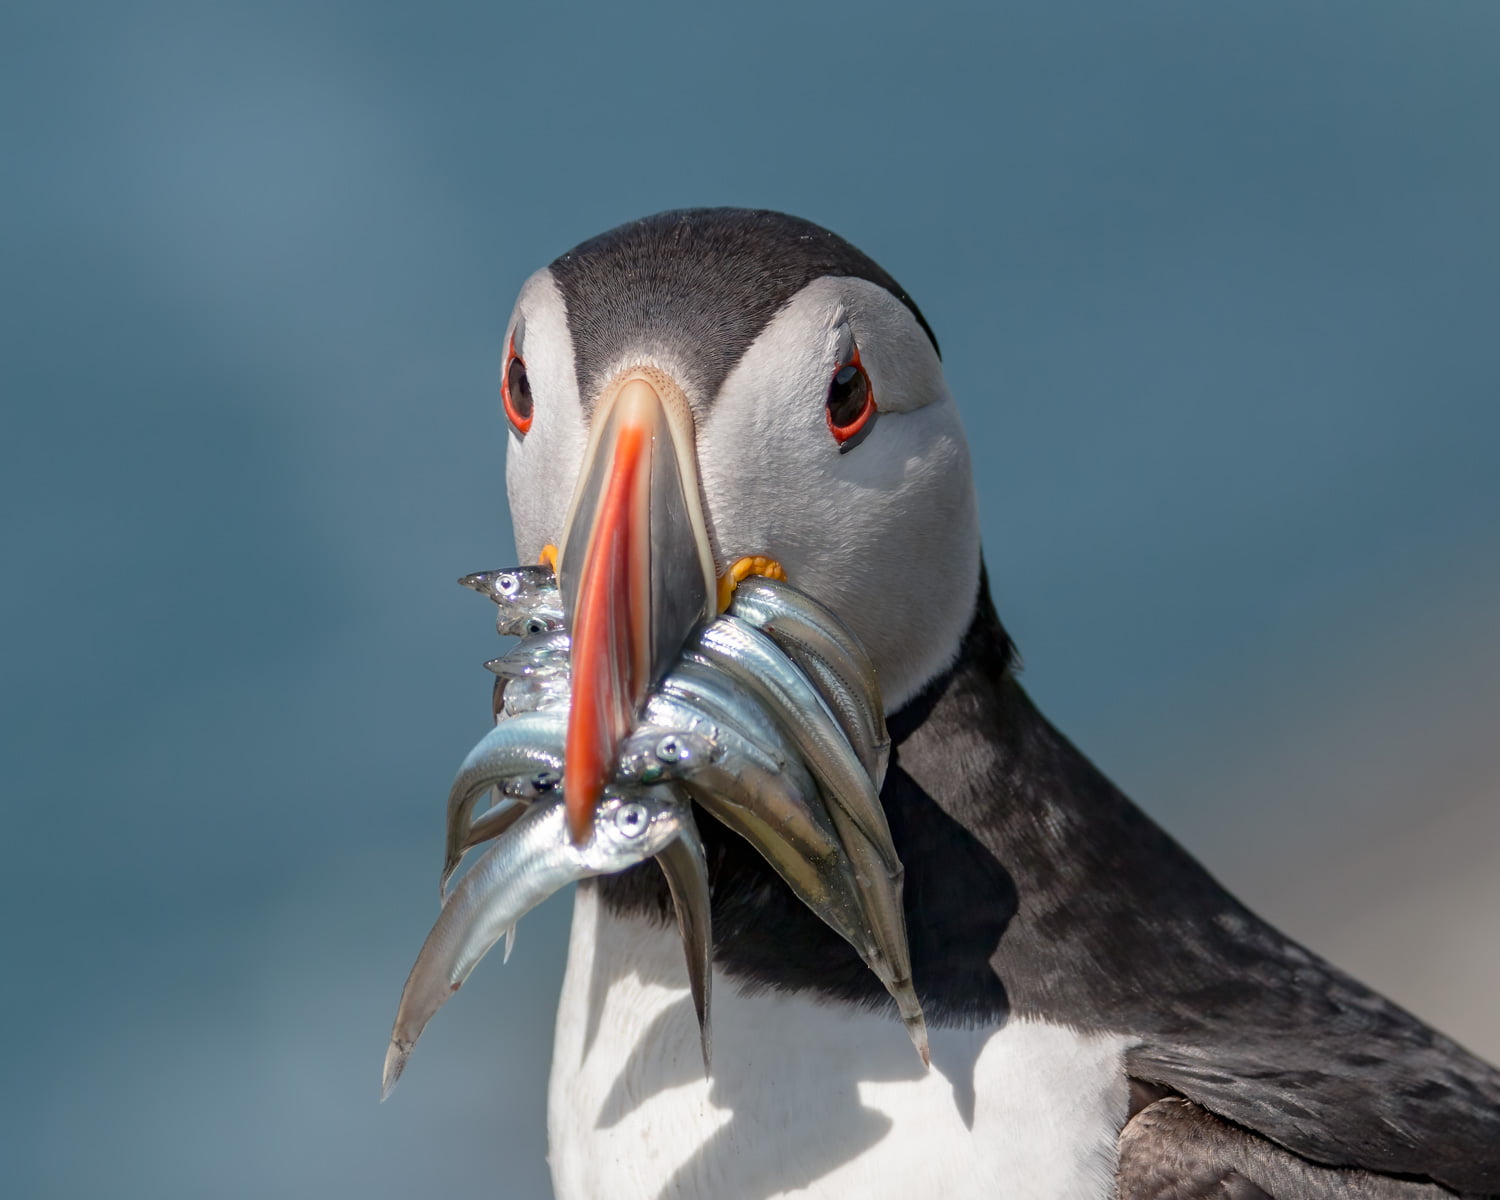 Where do puffins live in the UK? – The best places to see puffins